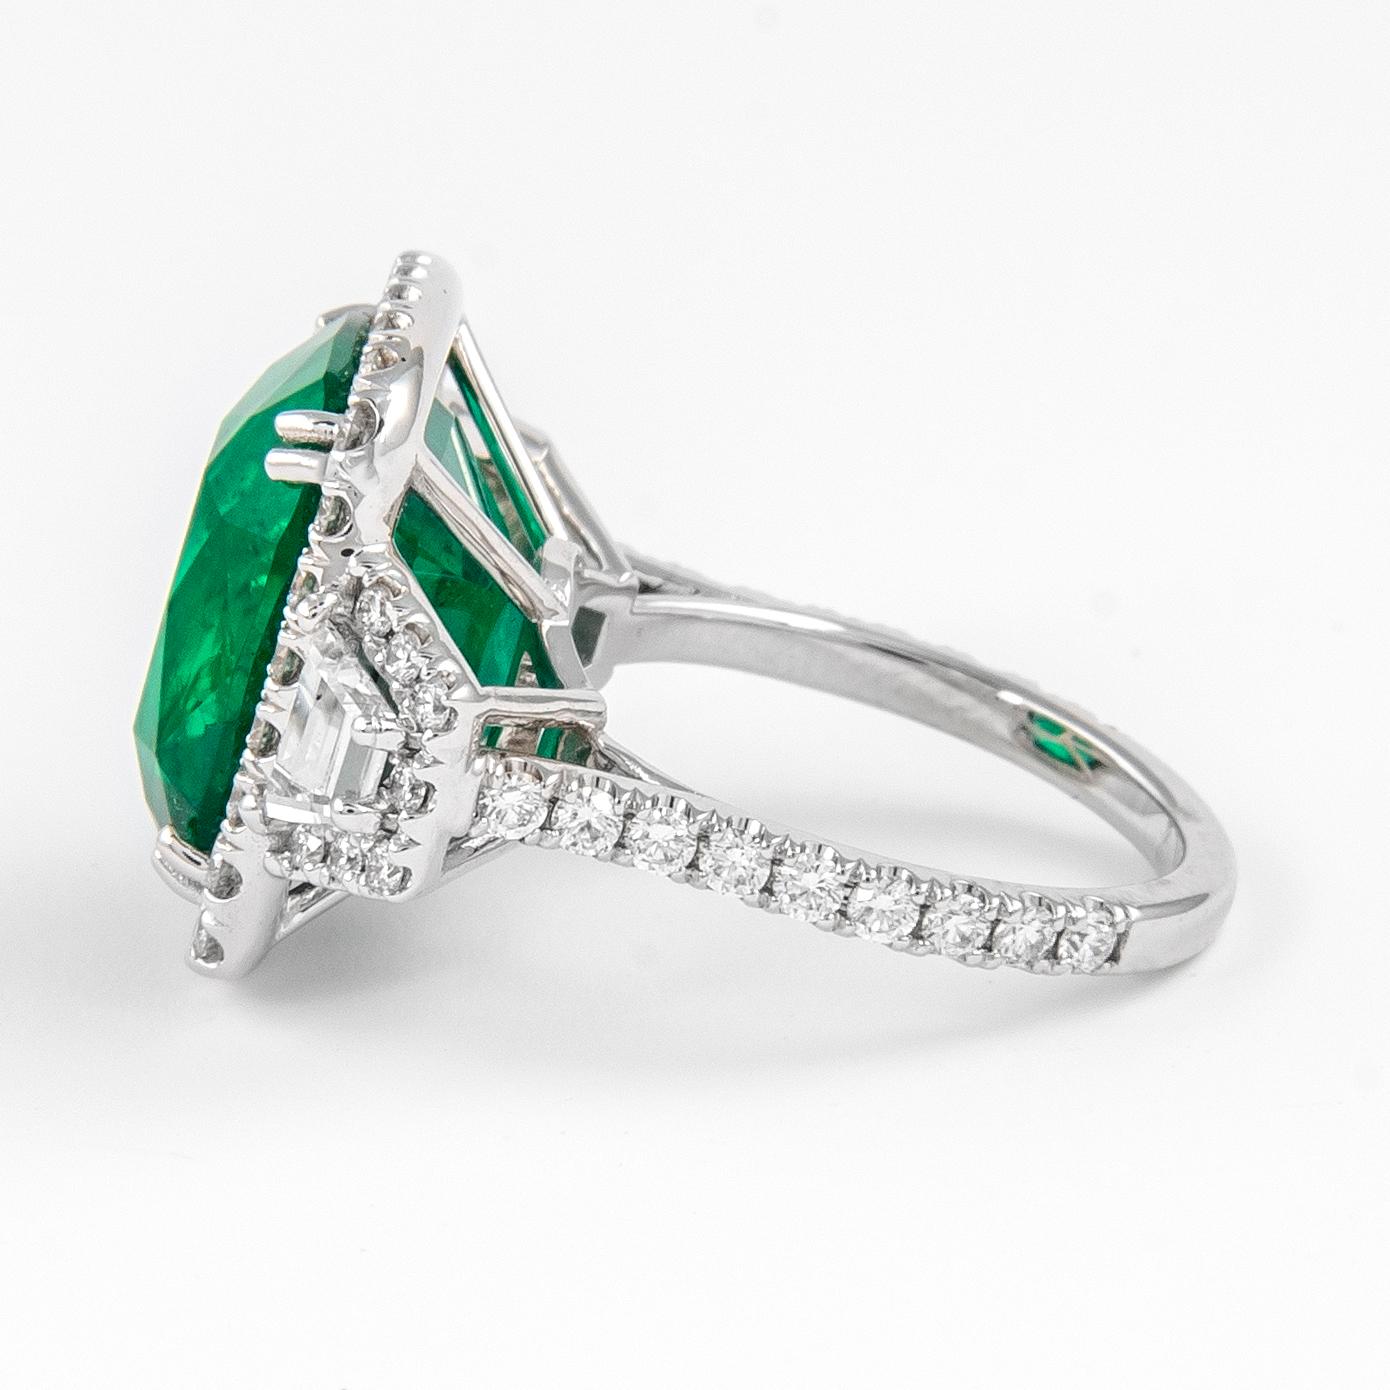 Alexander GIA & C.Dunaigre 11.24ct Emerald & Diamond Three Stone Halo Ring 18k In New Condition For Sale In BEVERLY HILLS, CA